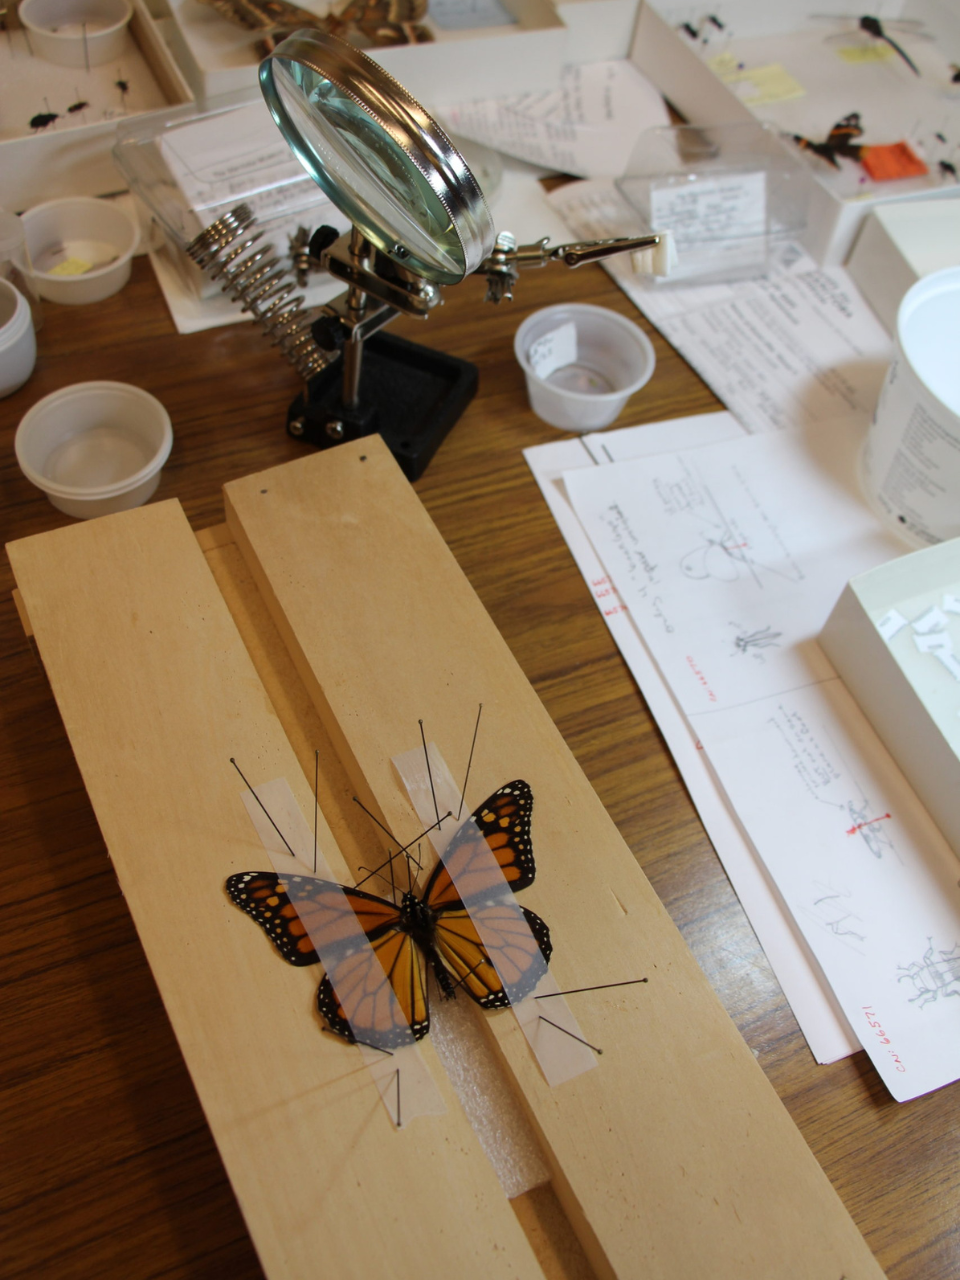 A monarch butterfly specimen positioned on a pinning board with strips of glassine and straight pins. In the background are a magnifying glass and various pinned insects in storage containers.